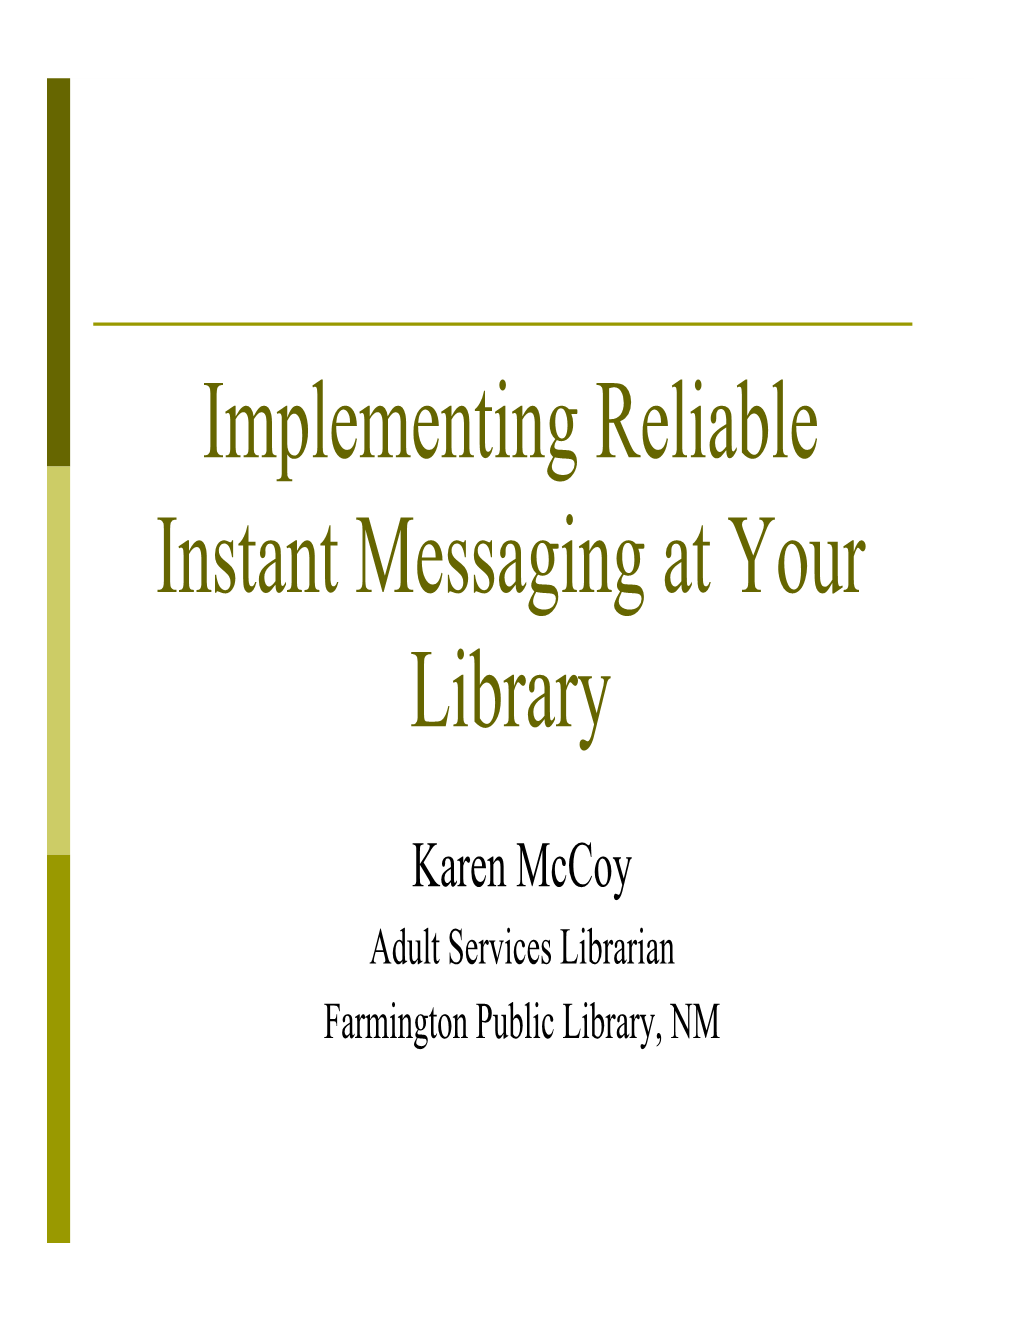 Implementing Reliable Instant Messaging at Your Library